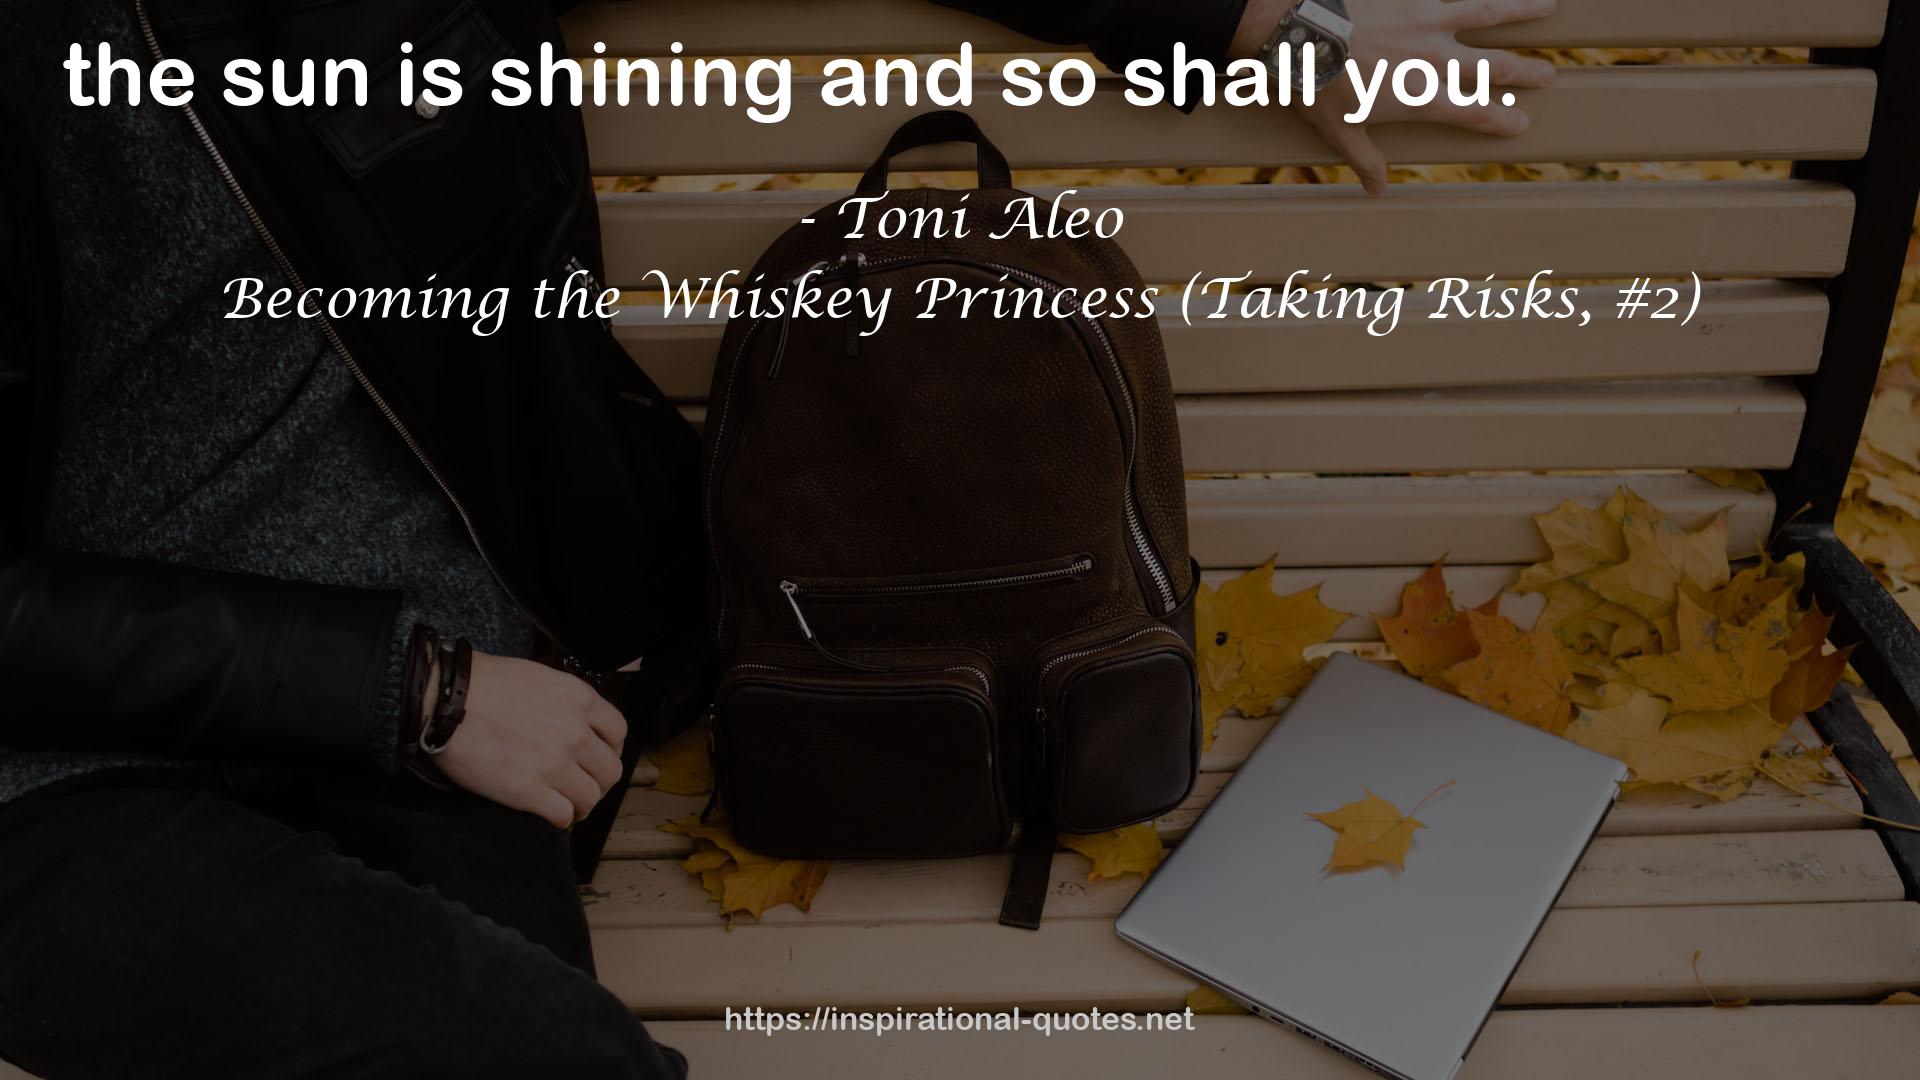 Becoming the Whiskey Princess (Taking Risks, #2) QUOTES